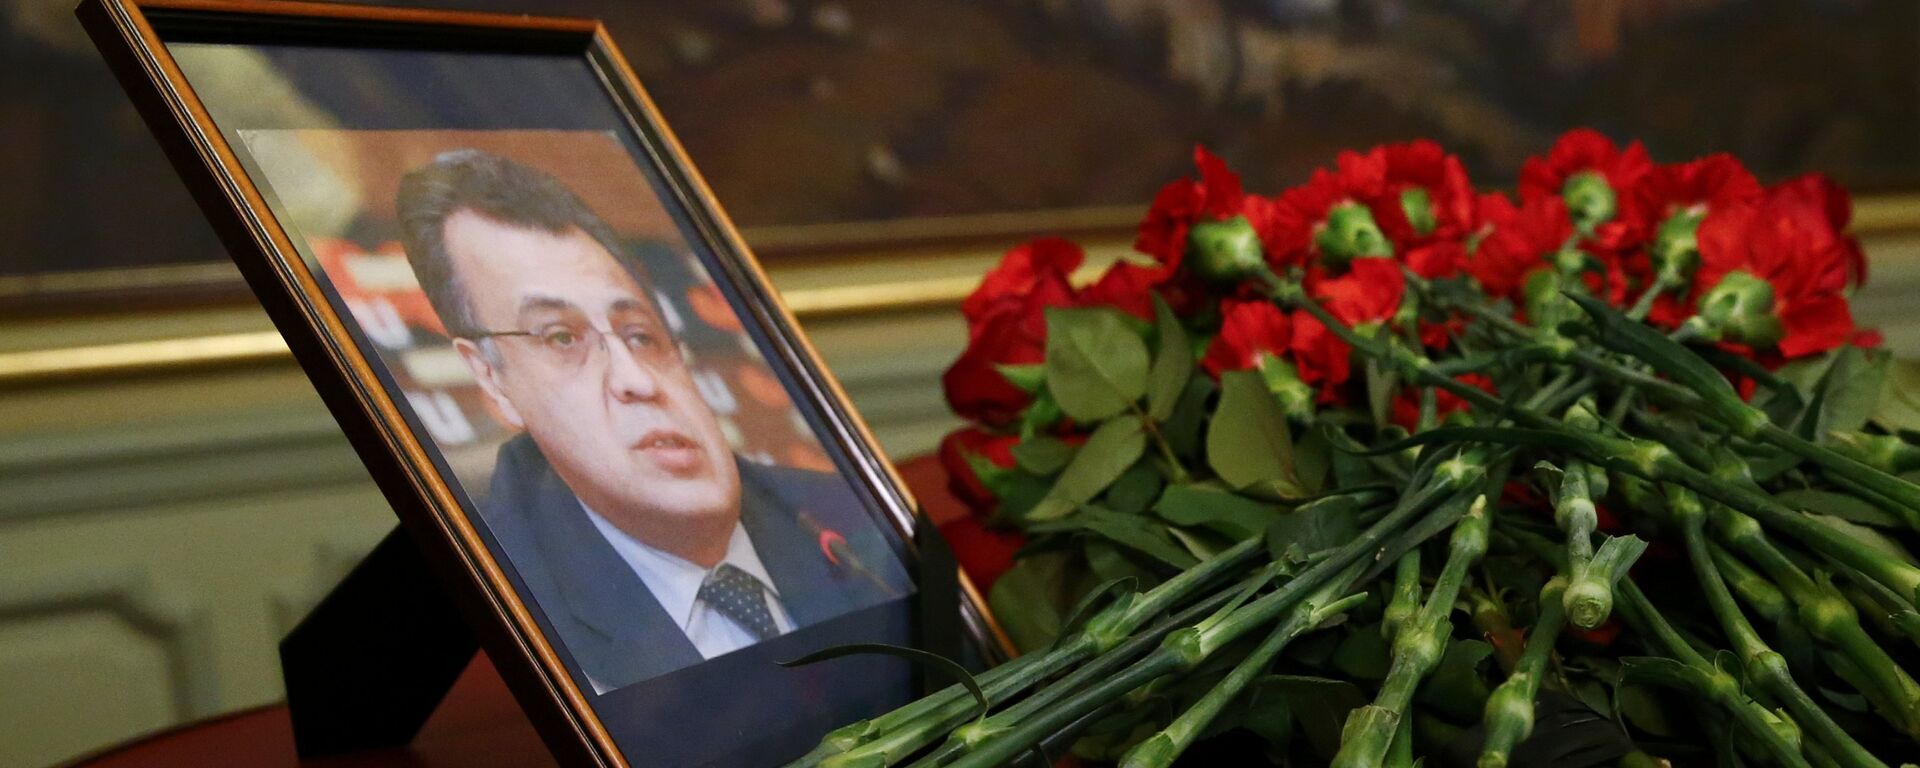 Flowers are placed near a portrait of murdered Russian ambassador to Turkey Karlov during a meeting of Russian Foreign Minister Lavrov with his Turkish counterpart Cavusoglu in Moscow - Sputnik Mundo, 1920, 09.03.2021